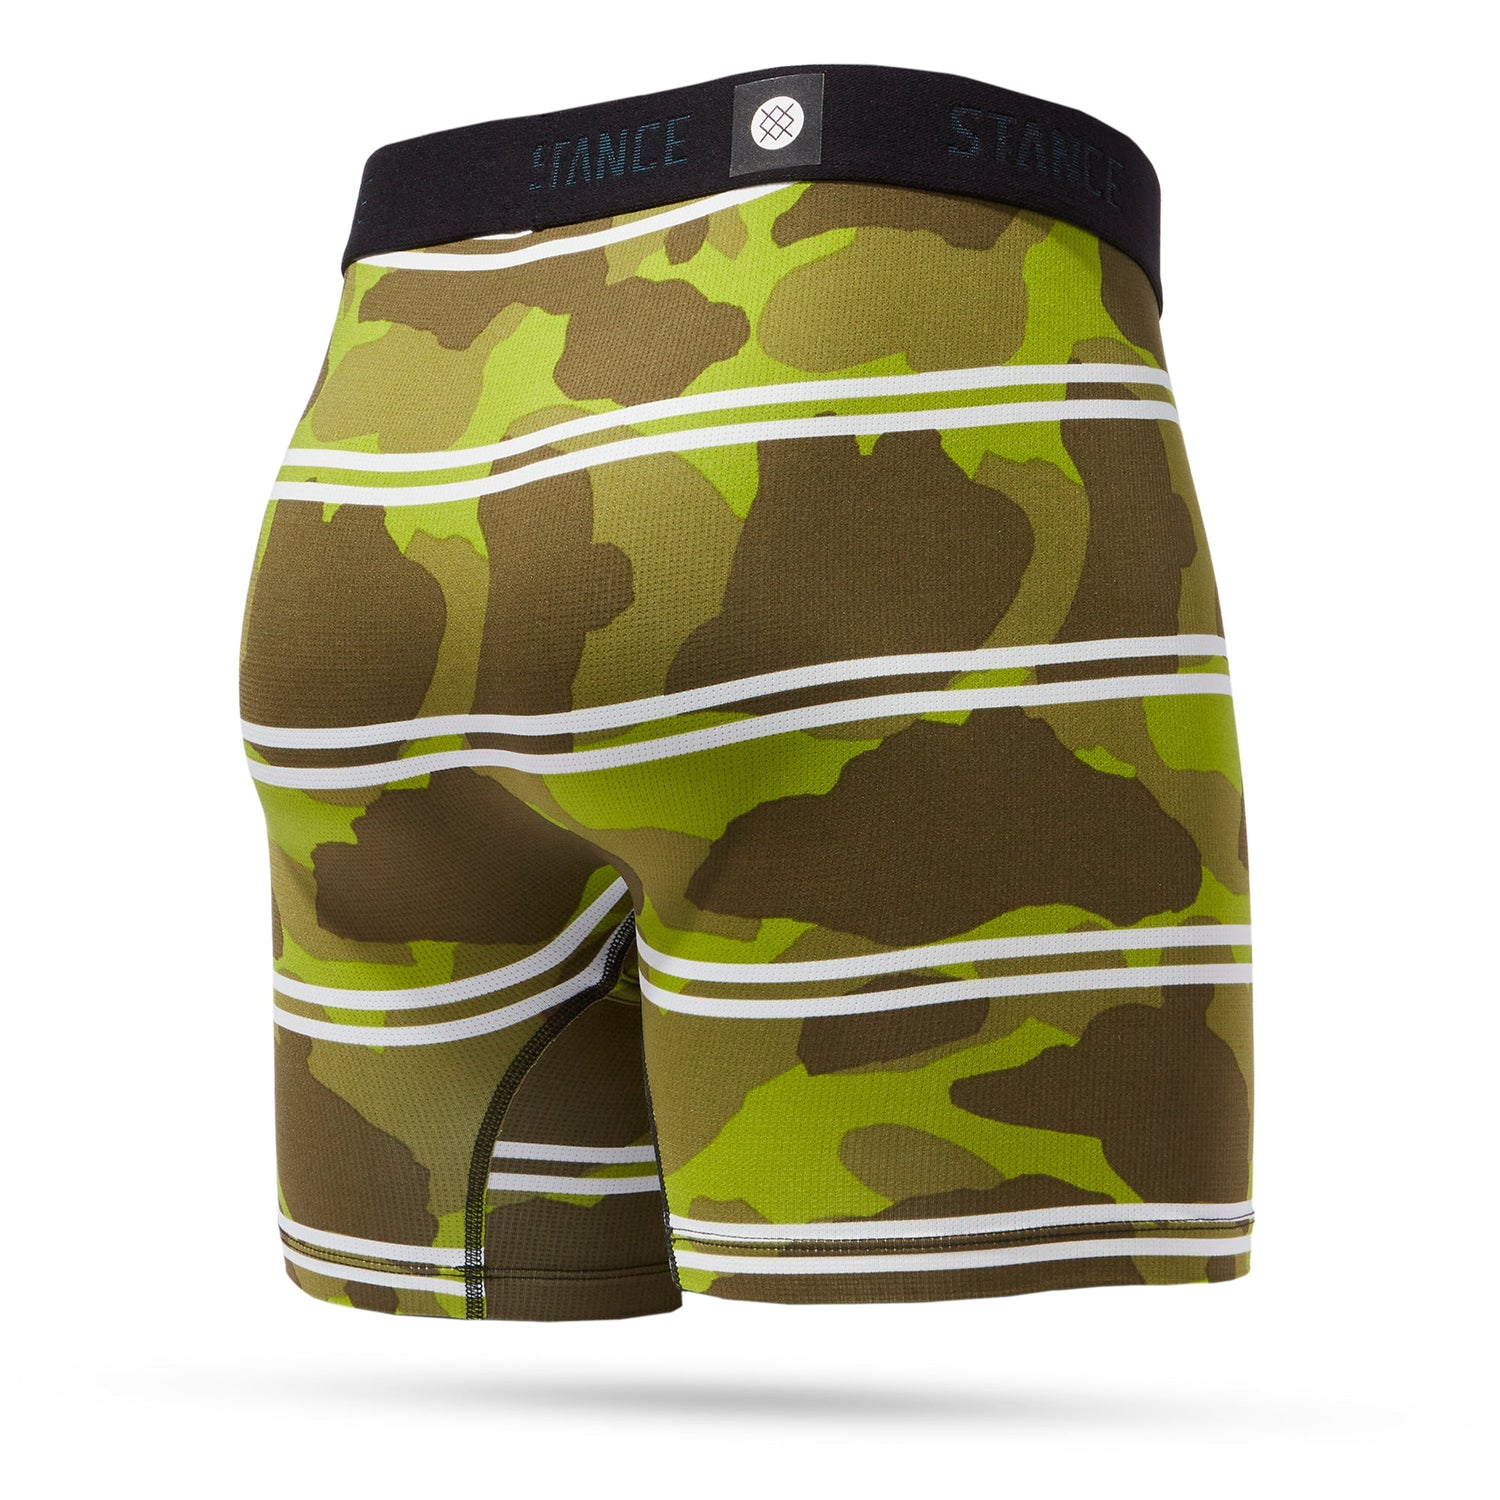 Stance Abrams Boxer Brief Wholester Green